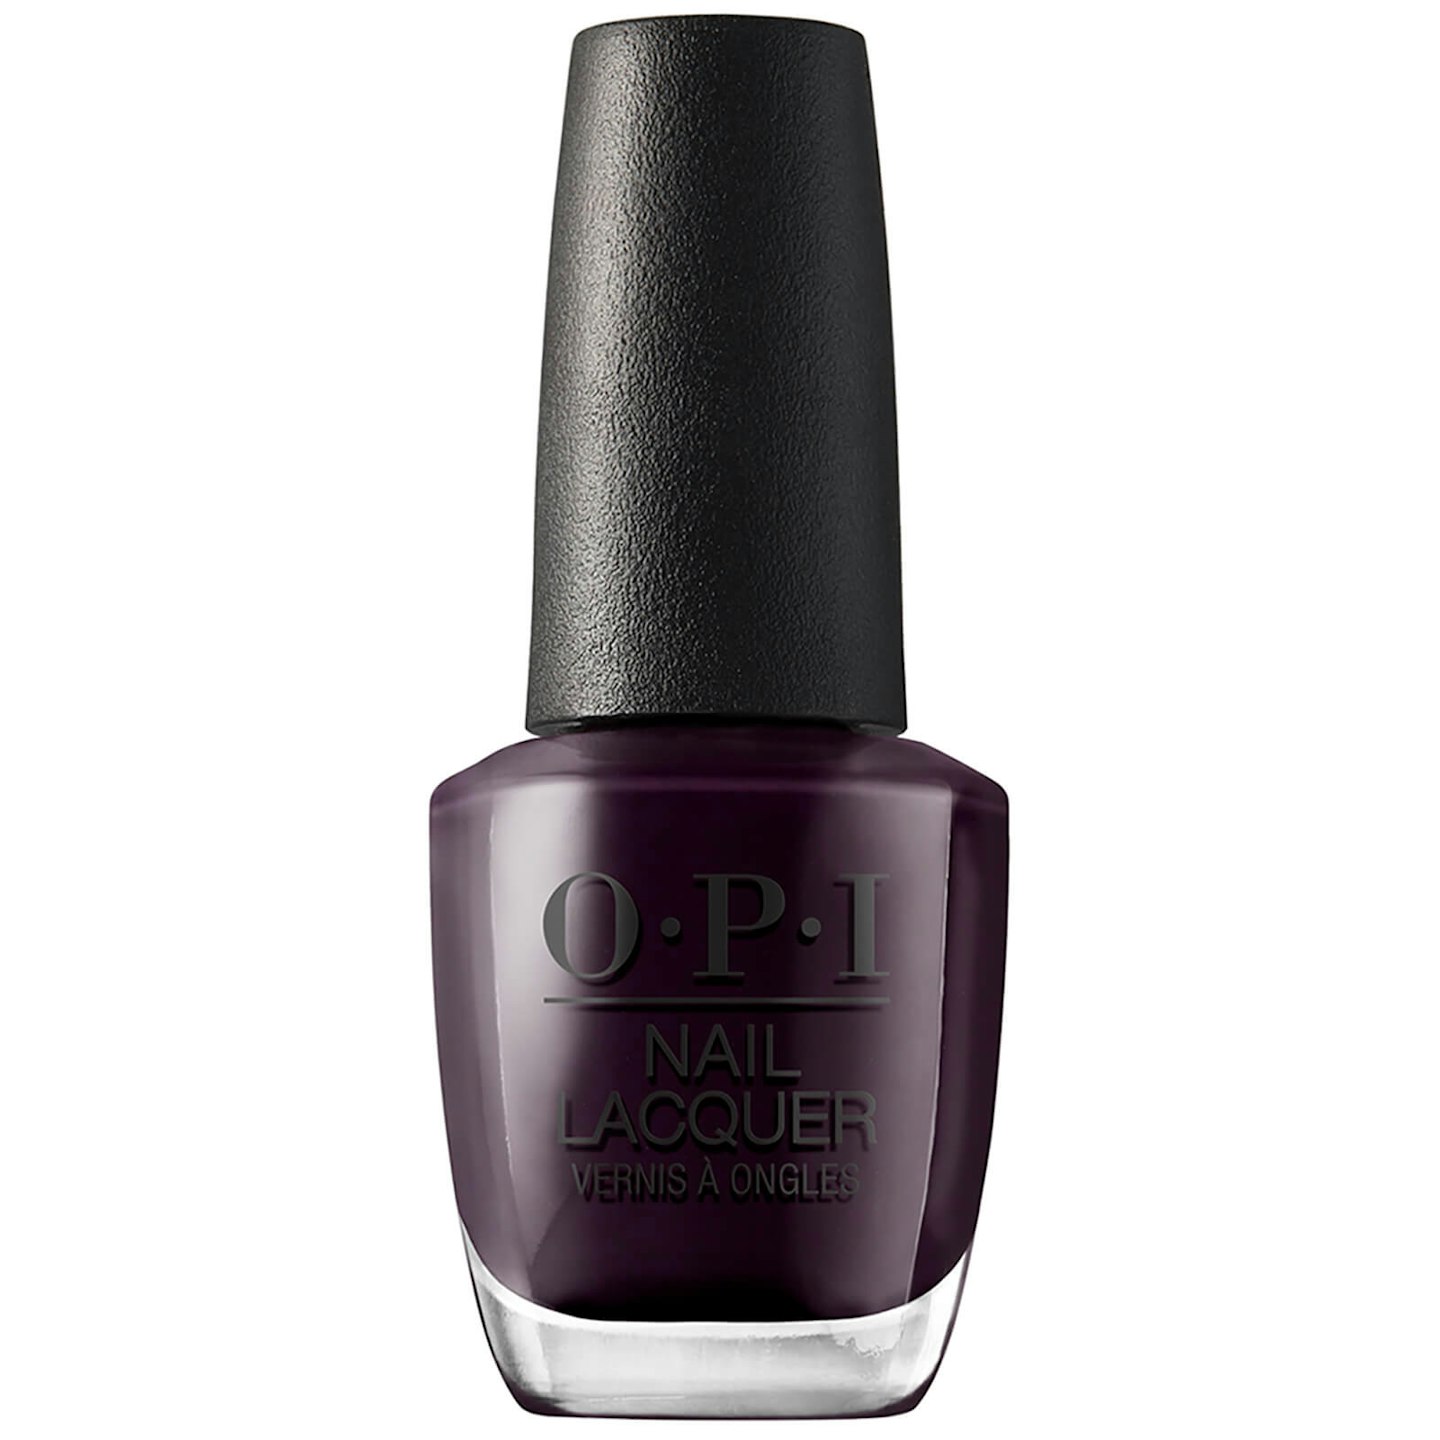 OPI Scotland Limited Edition Nail Polish in Good Girls Gone Plaid, £13.50